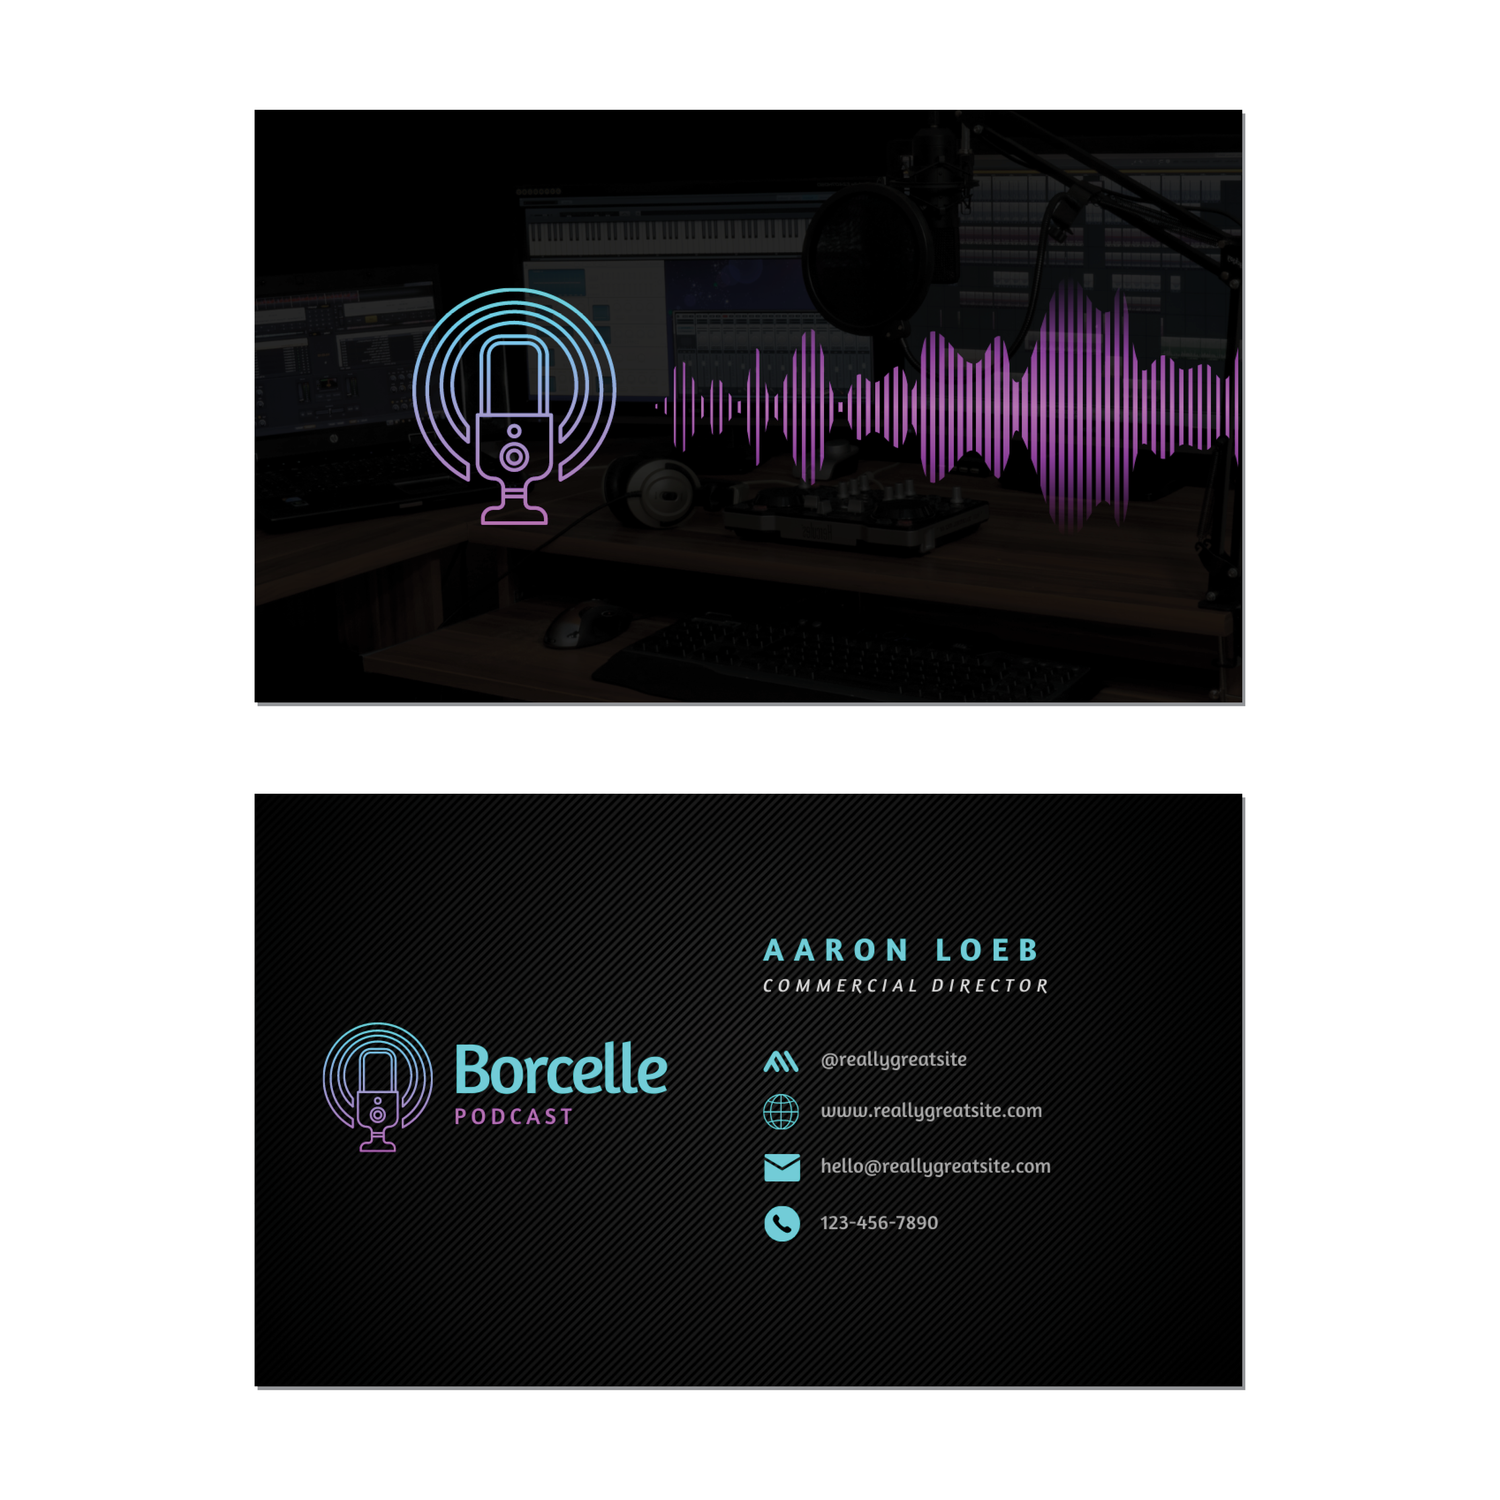 Galaxy Podcast - Business Card Template - Two Side